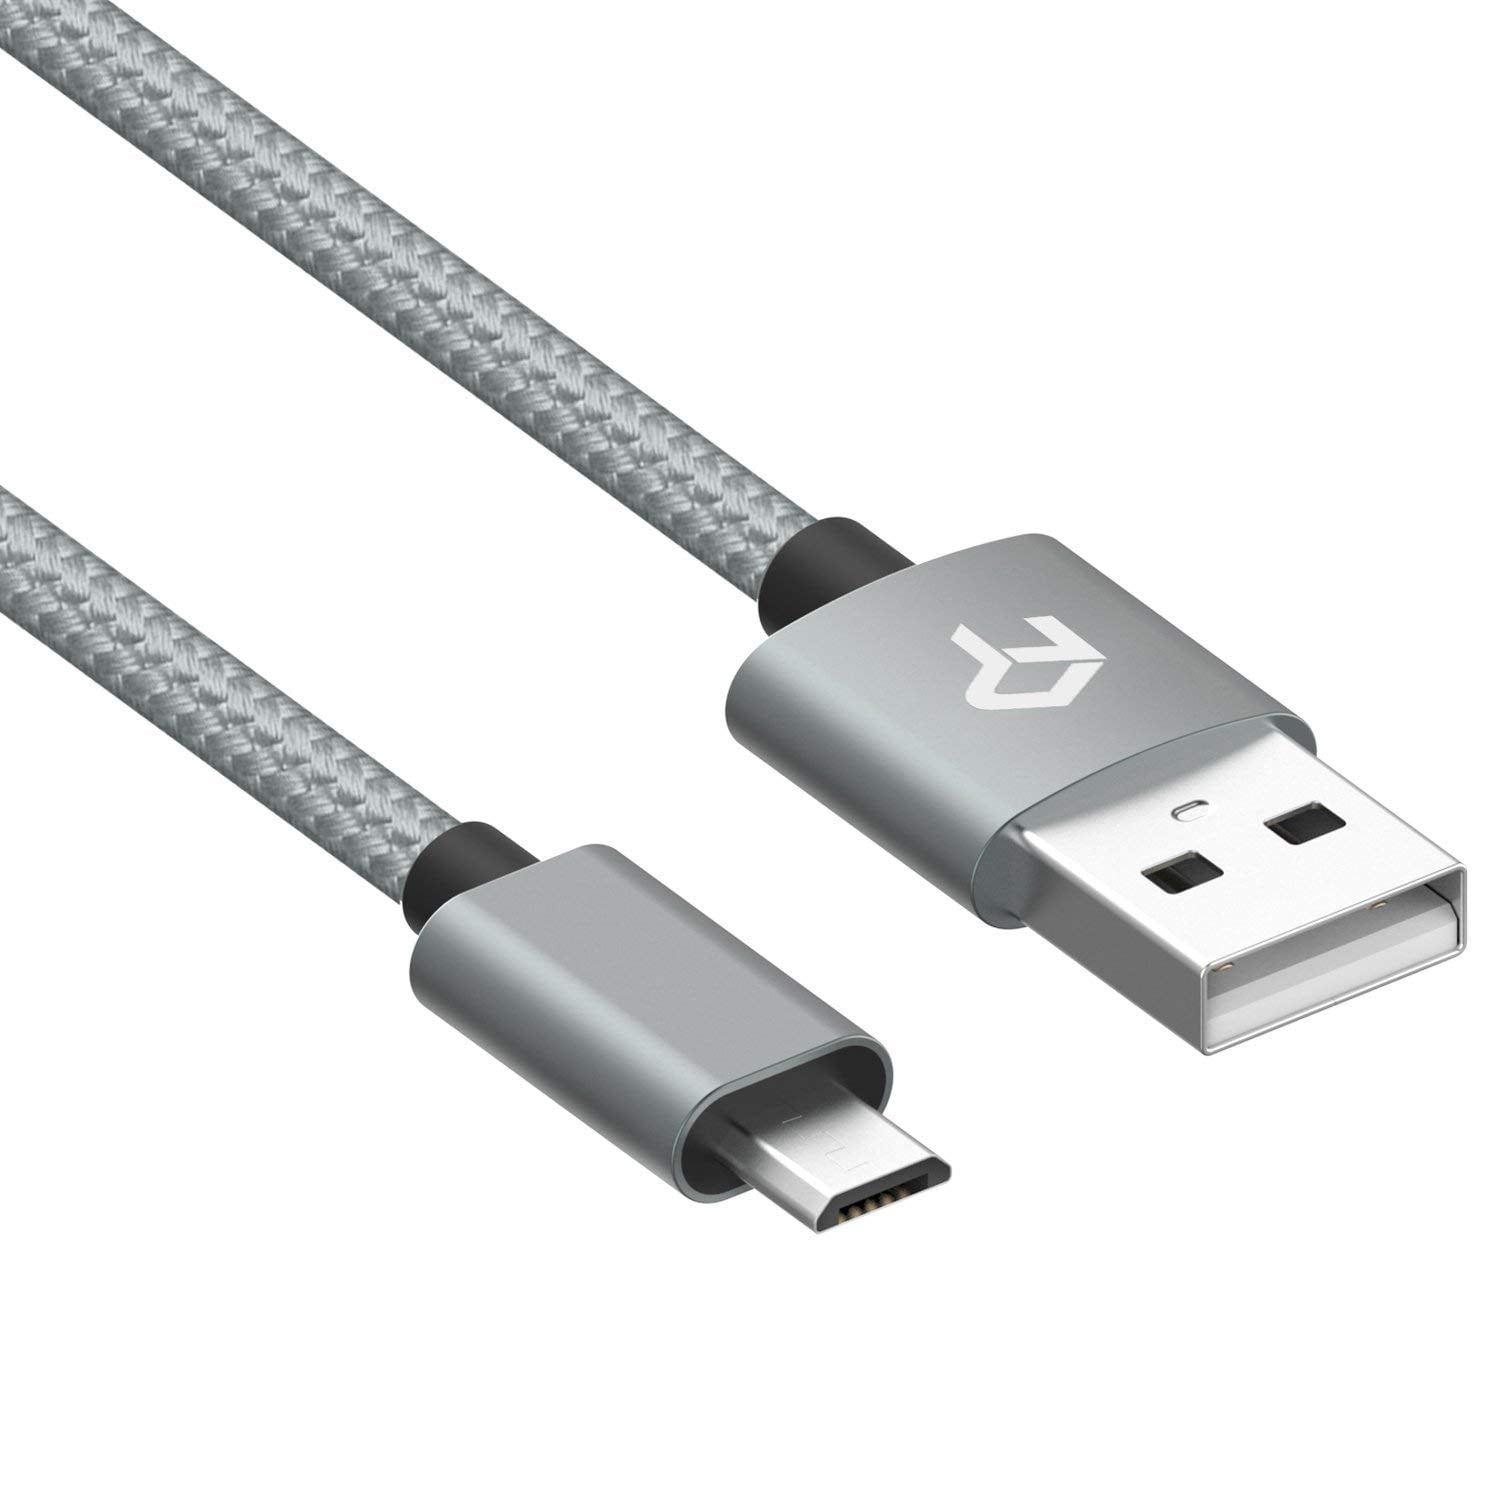 Micro usb power cable